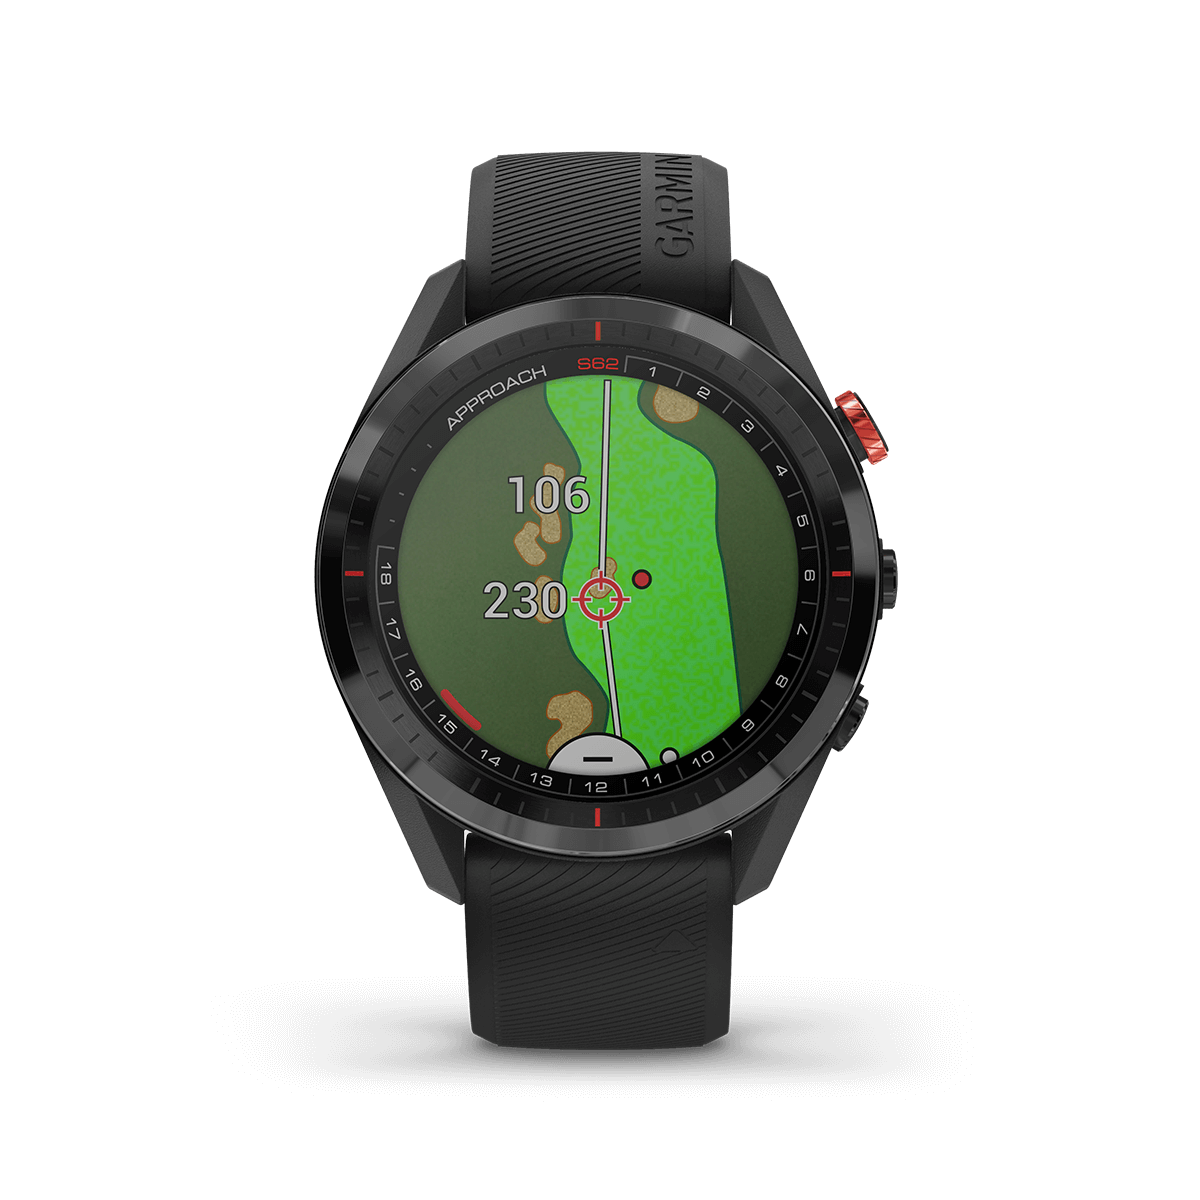 Approach S62 | All Wearables & Smartwatches | Garmin Philippines